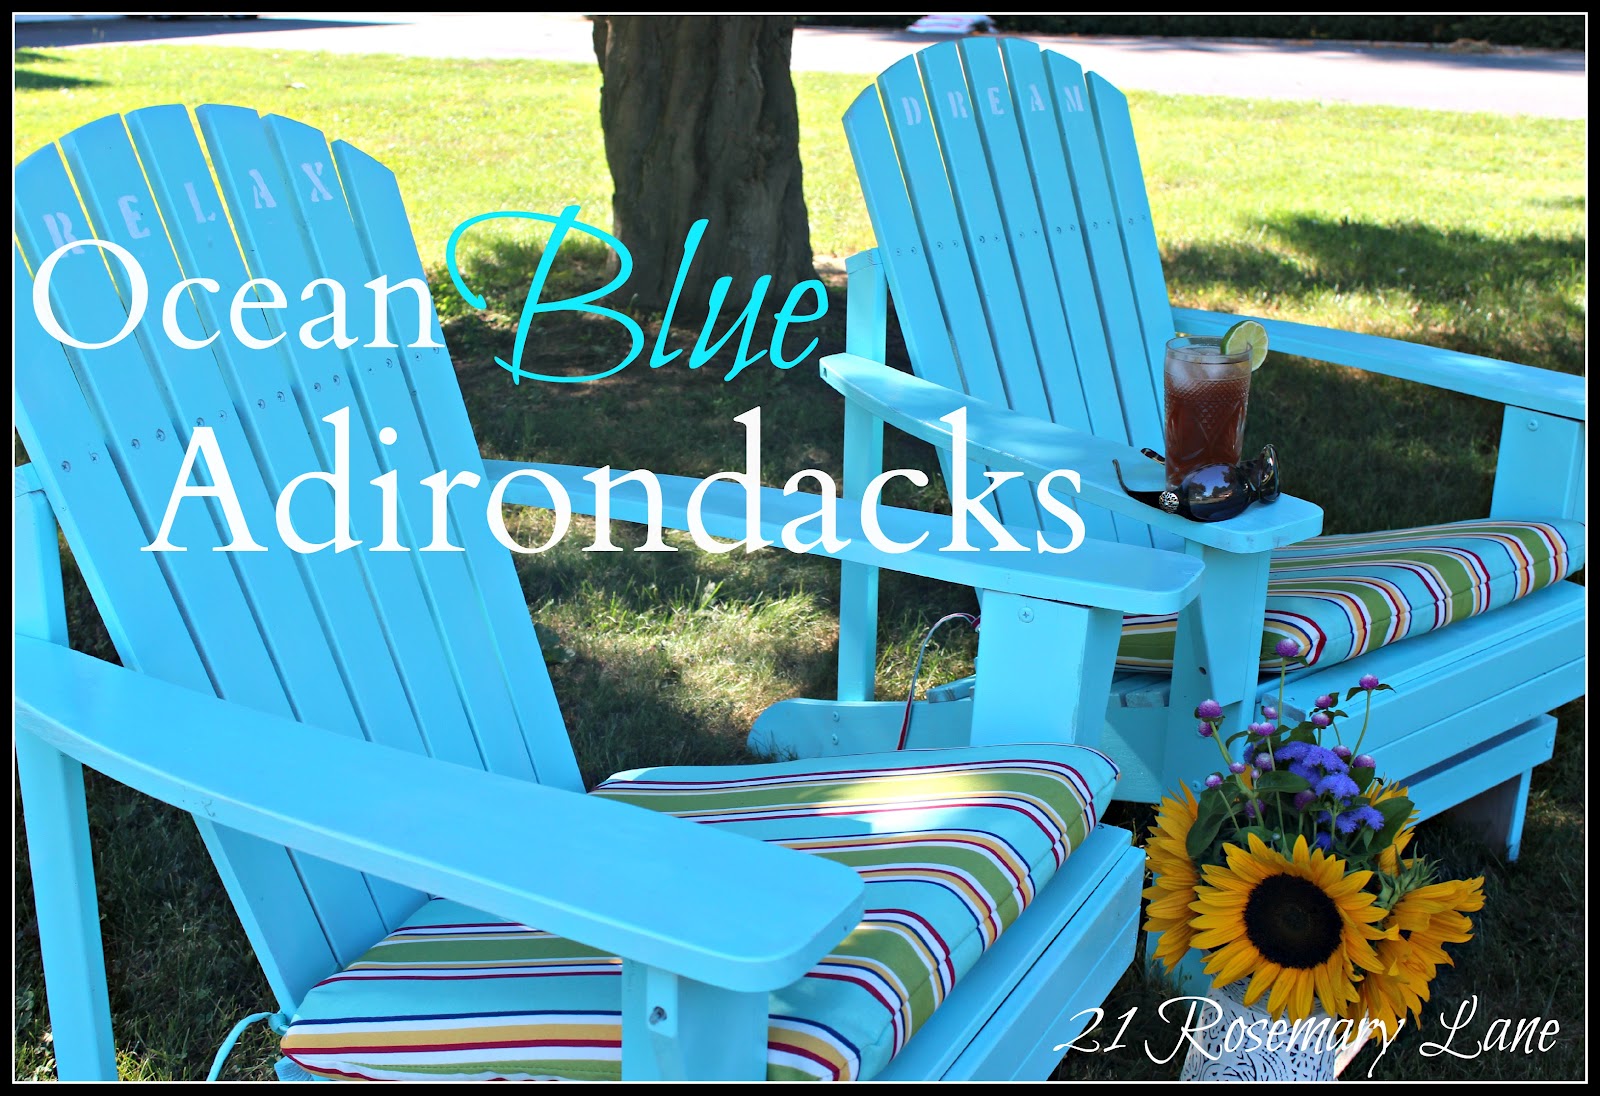  assemble yourself" Adirondack chairs from Home Depot for $29.95 each